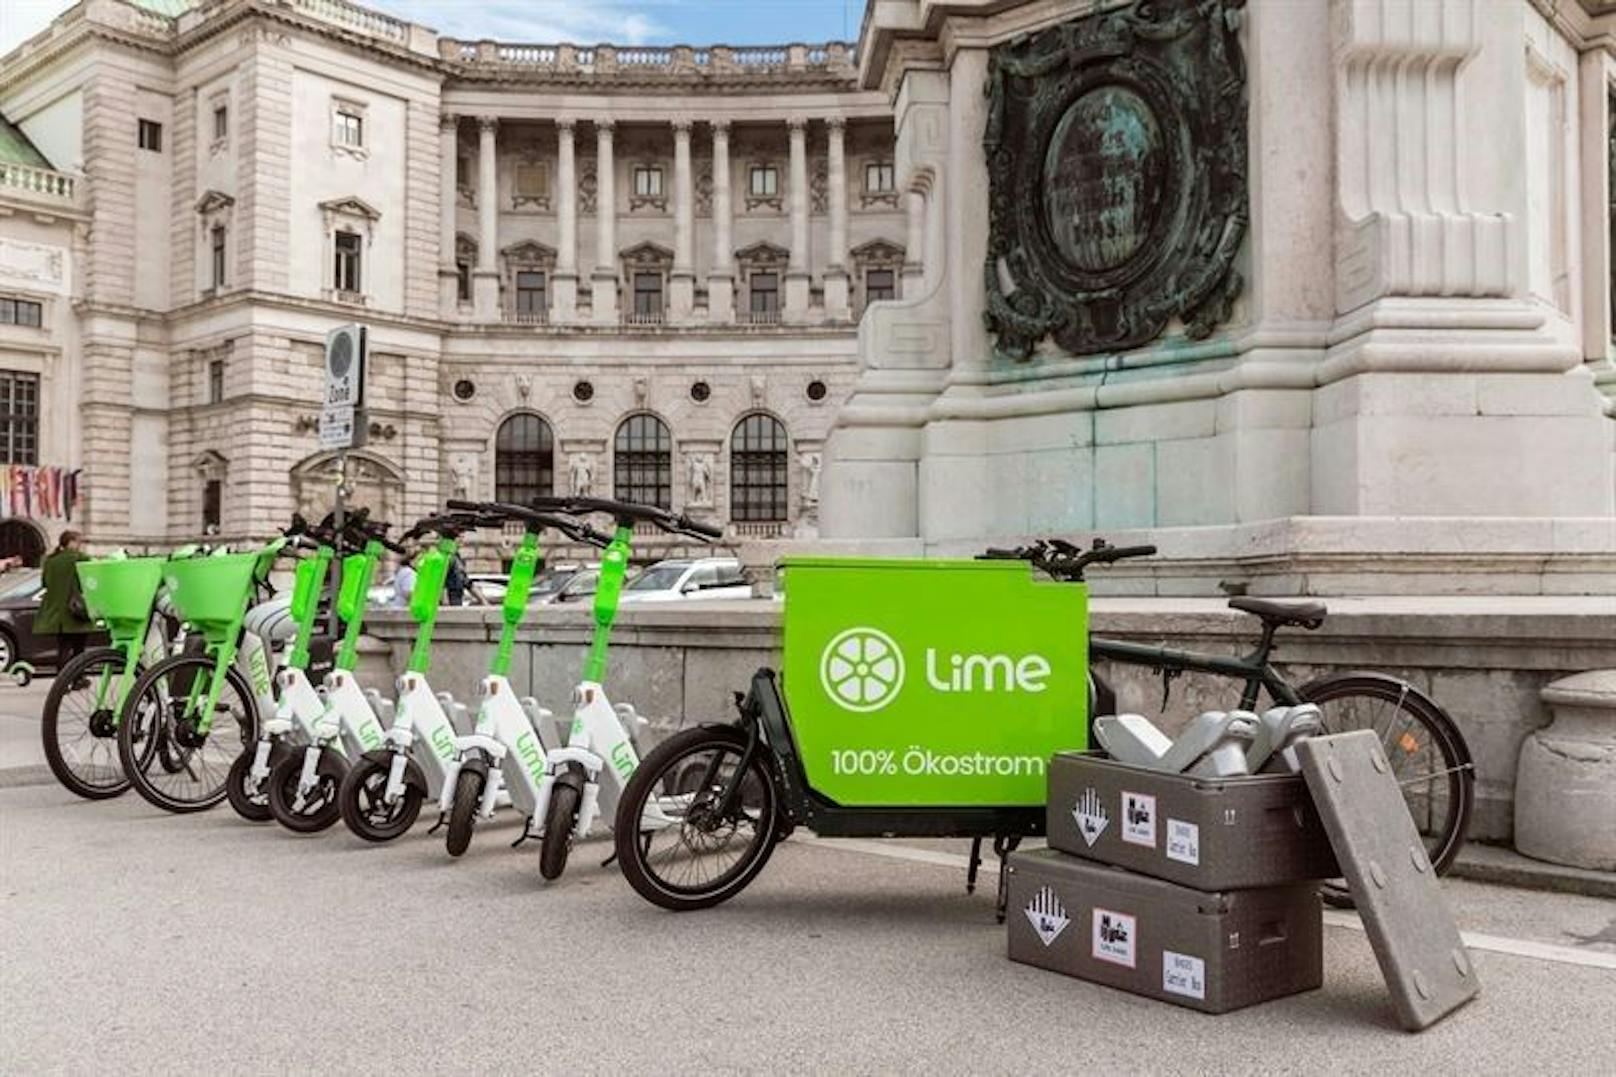 Ab sofort operiert Lime in Wien CO2-neutral.